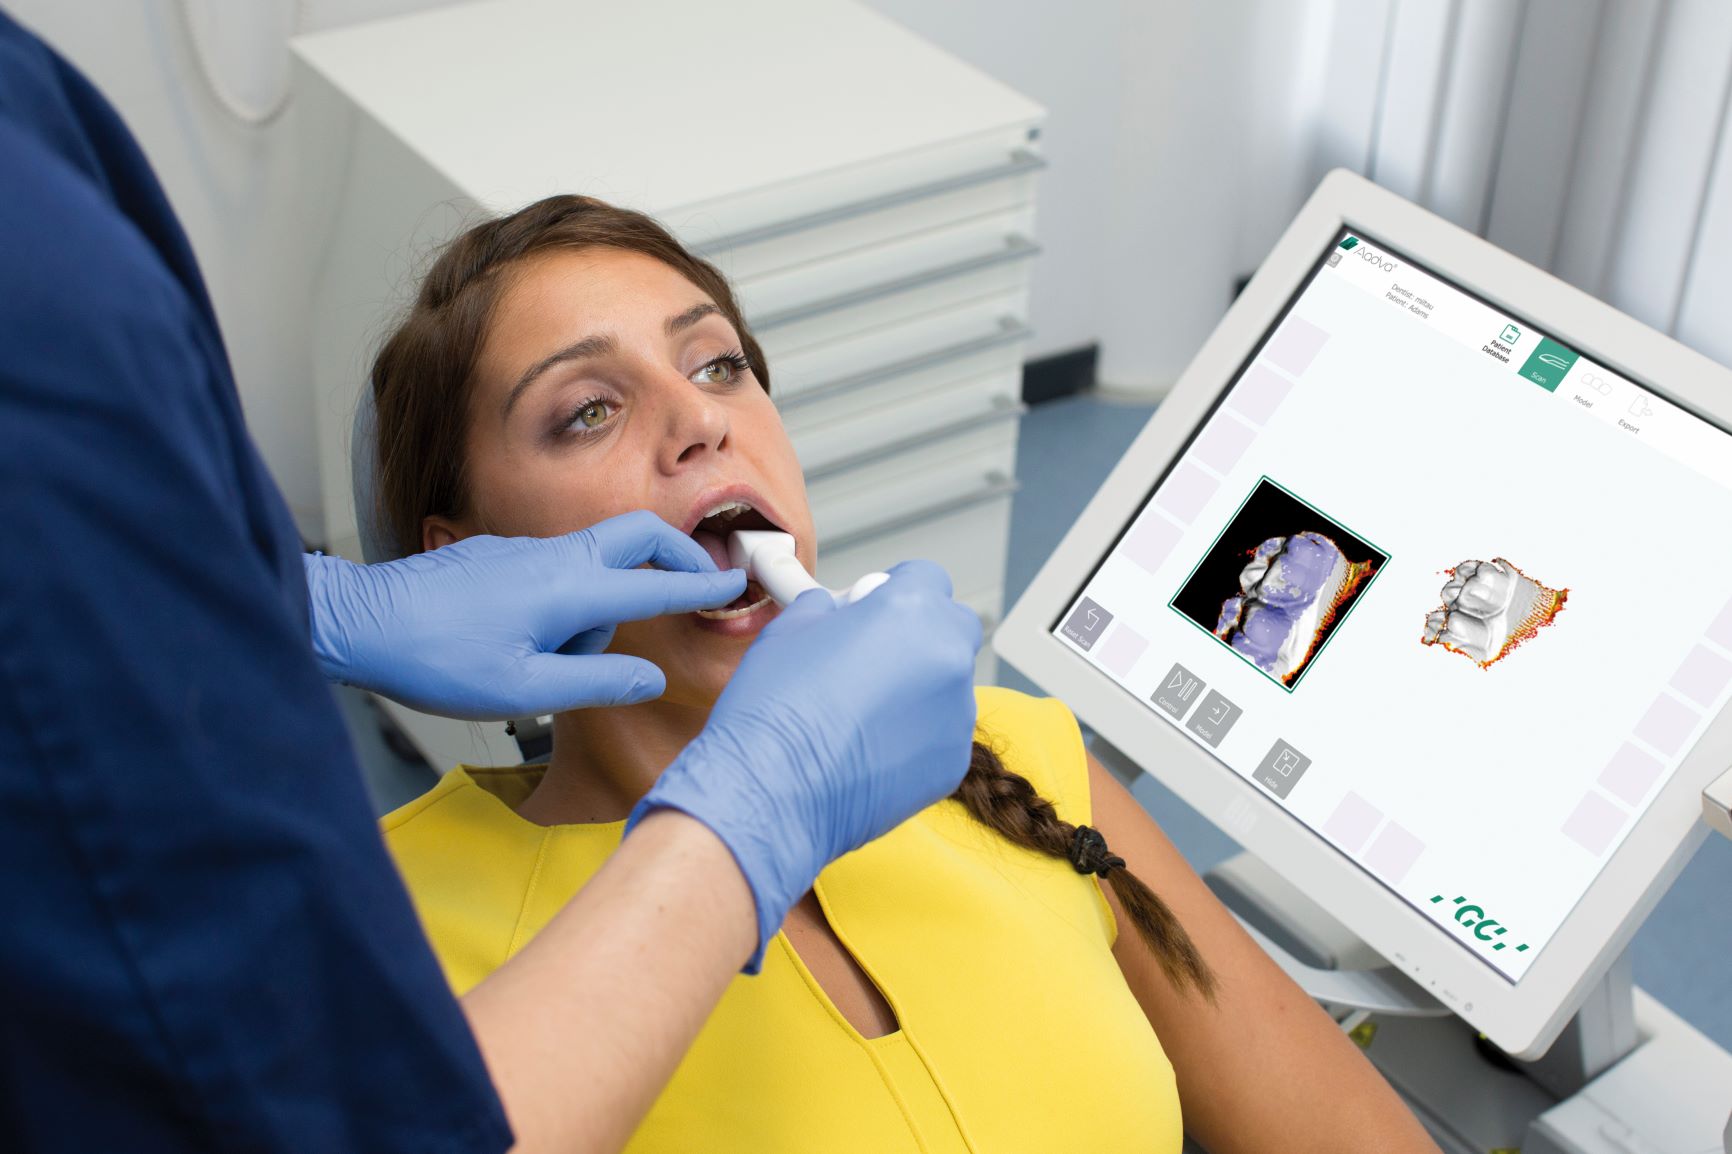 dentalscanner used on a patient